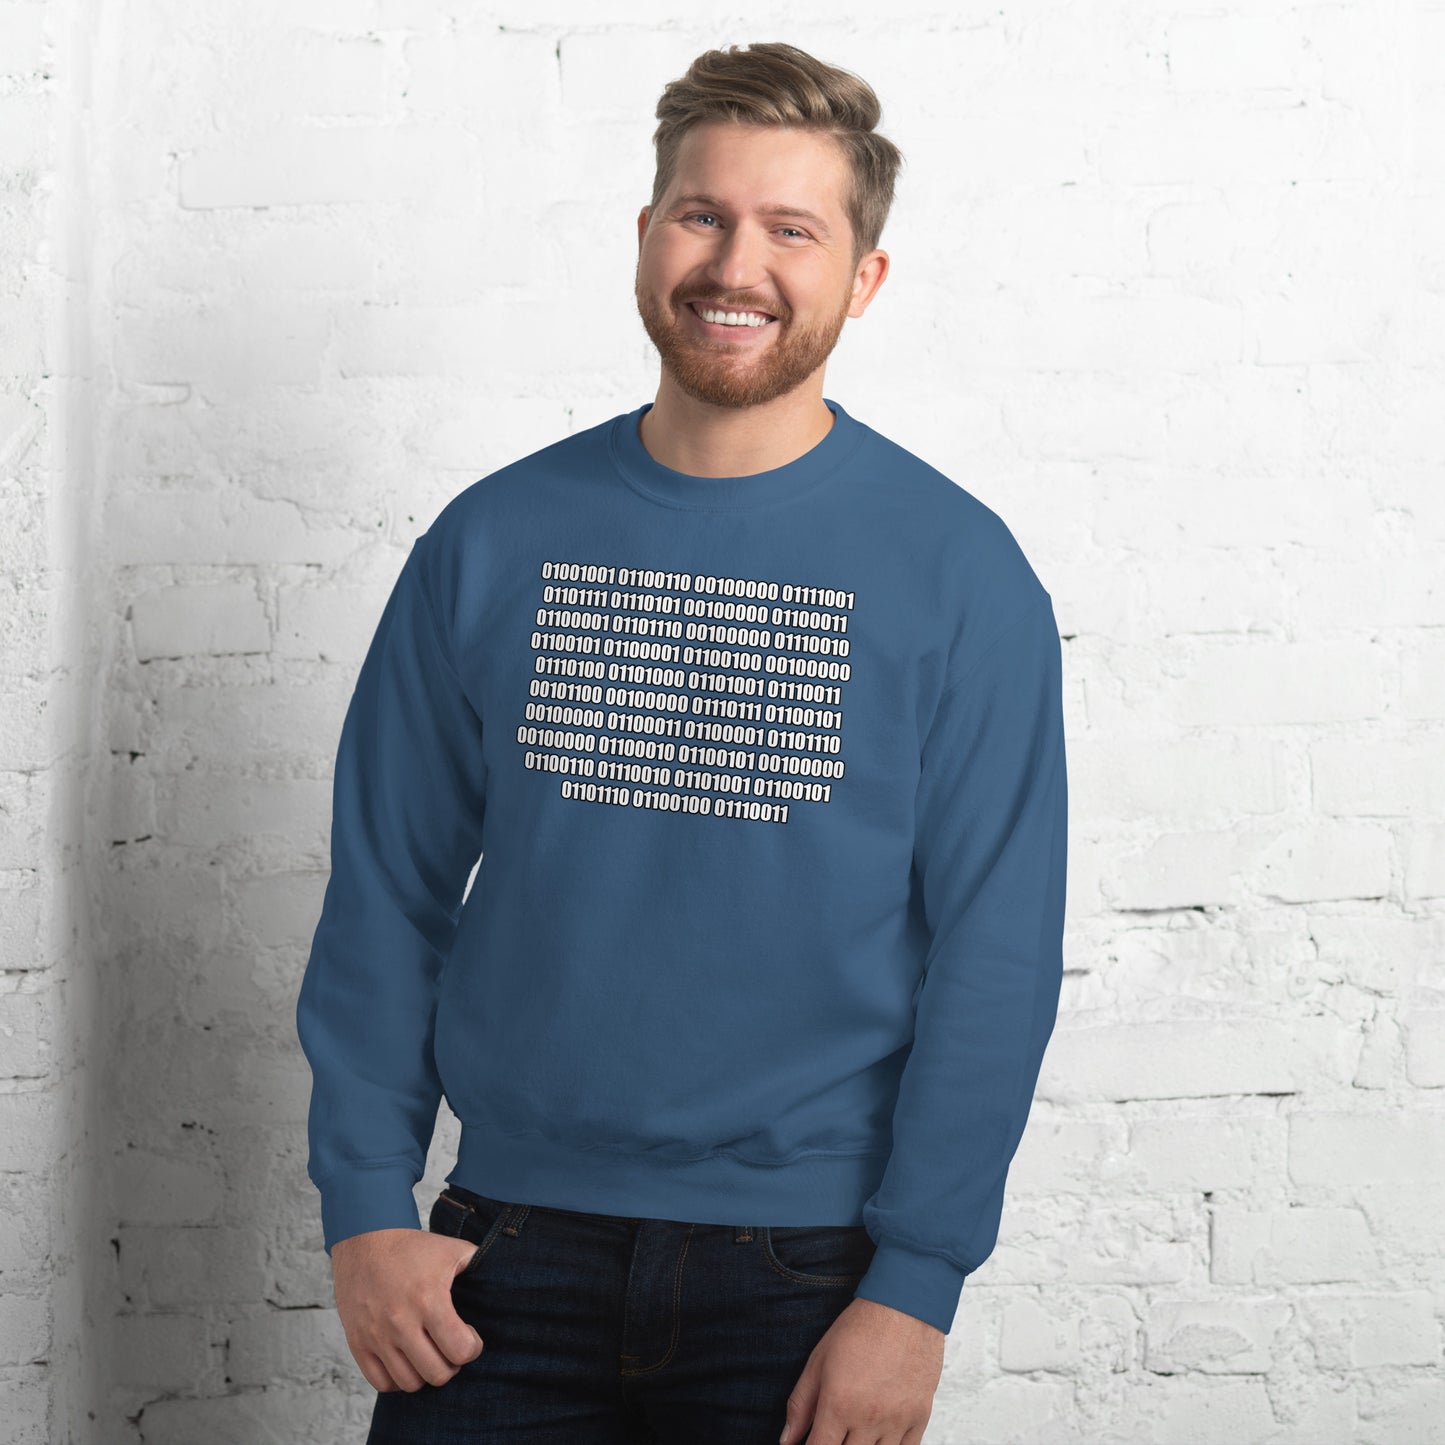 Men with indigo blue sweatshirt with binaire text "If you can read this"